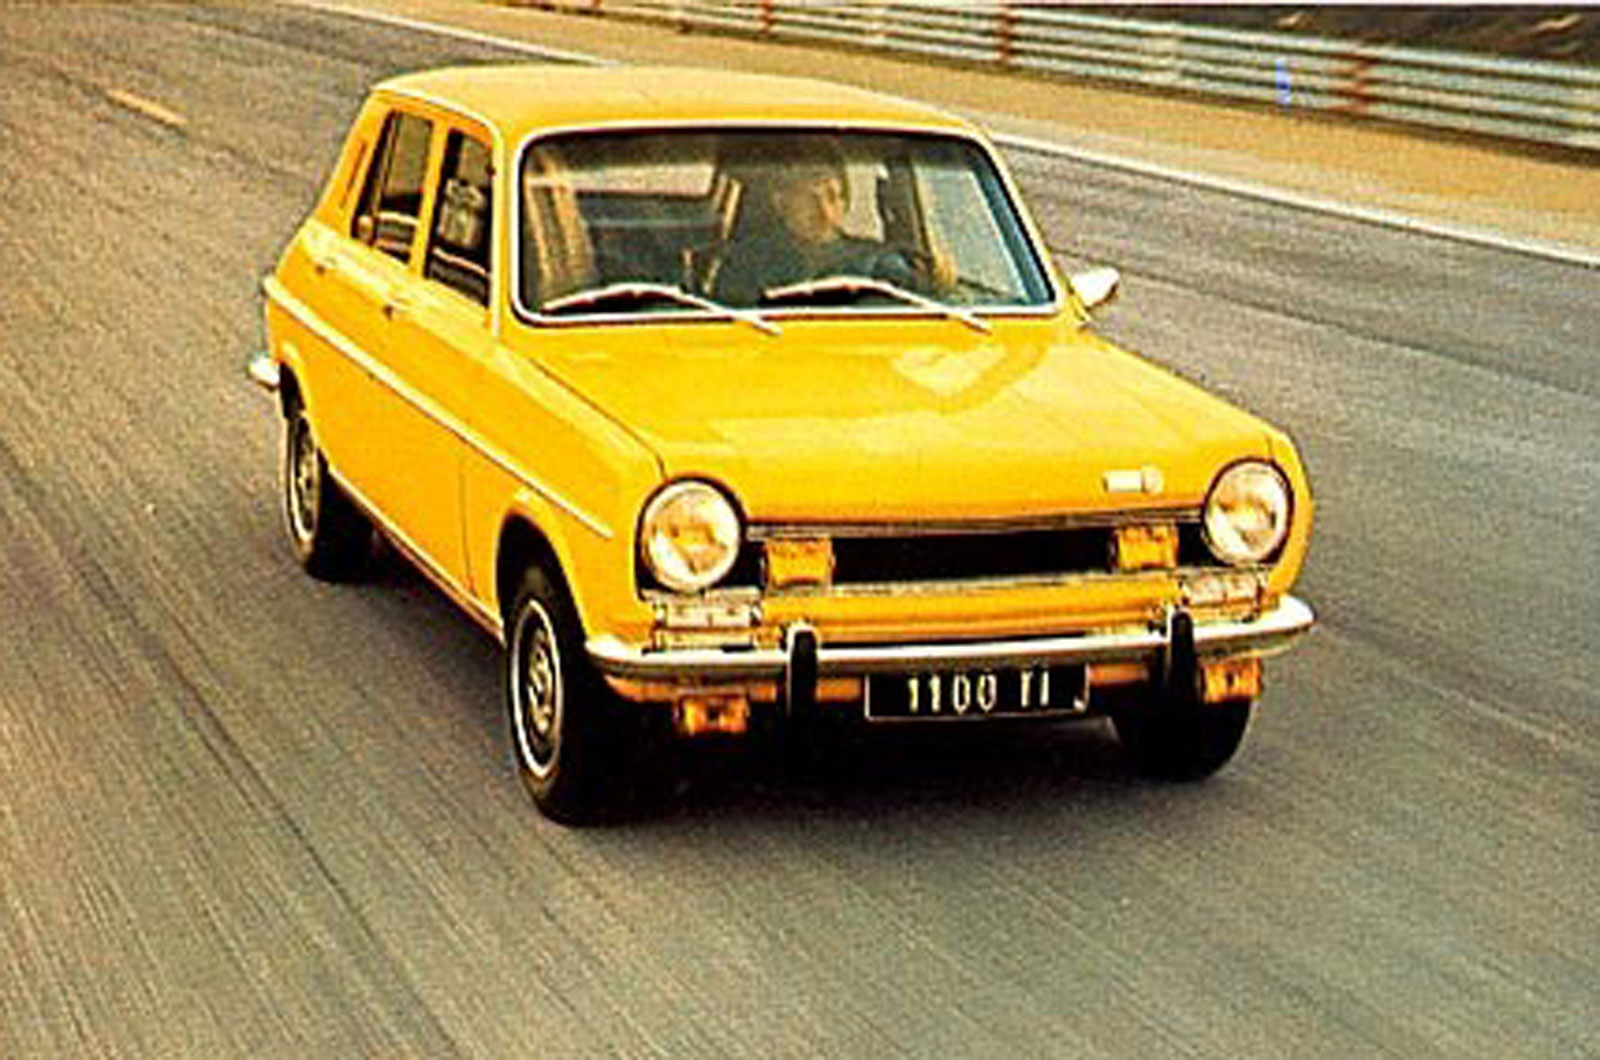 <p>We've included this one simply to explode a myth – that the Volkswagen Golf GTi was the first fast hatchback. If the Mini Cooper had been a hatchback, or the BMC 1300 (specifically in 1300GT form), the Brits could have claimed the first hot hatch.</p><p>But it was actually the French, in the form of the Simca 1100 Ti that pipped VW to the post. With its <strong>82bhp</strong> twin-carb 1.3-litre engine the Simca could manage 105mph along with 0-60mph in under 12 seconds, which wasn't as quick as the Golf GTi that came three years later.</p><p><strong>GROUNDBREAKER SCORE: 6 </strong>– where would European car firms be without them?</p>